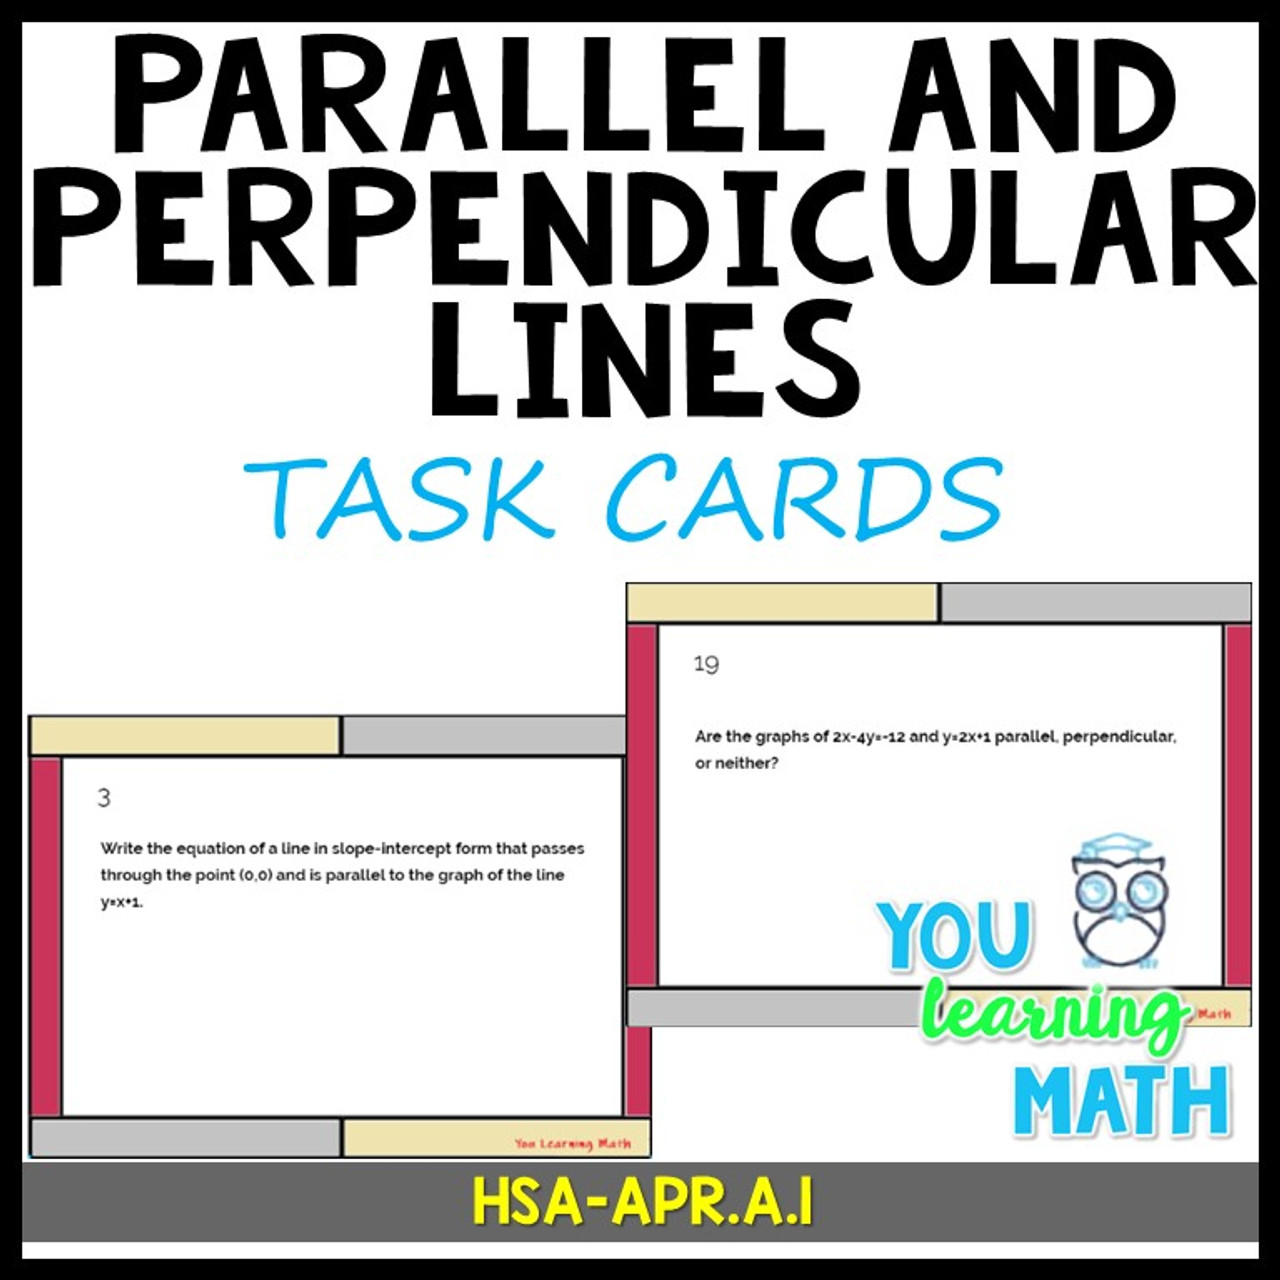 Parallel and Perpendicular Lines - 21 Task Cards 